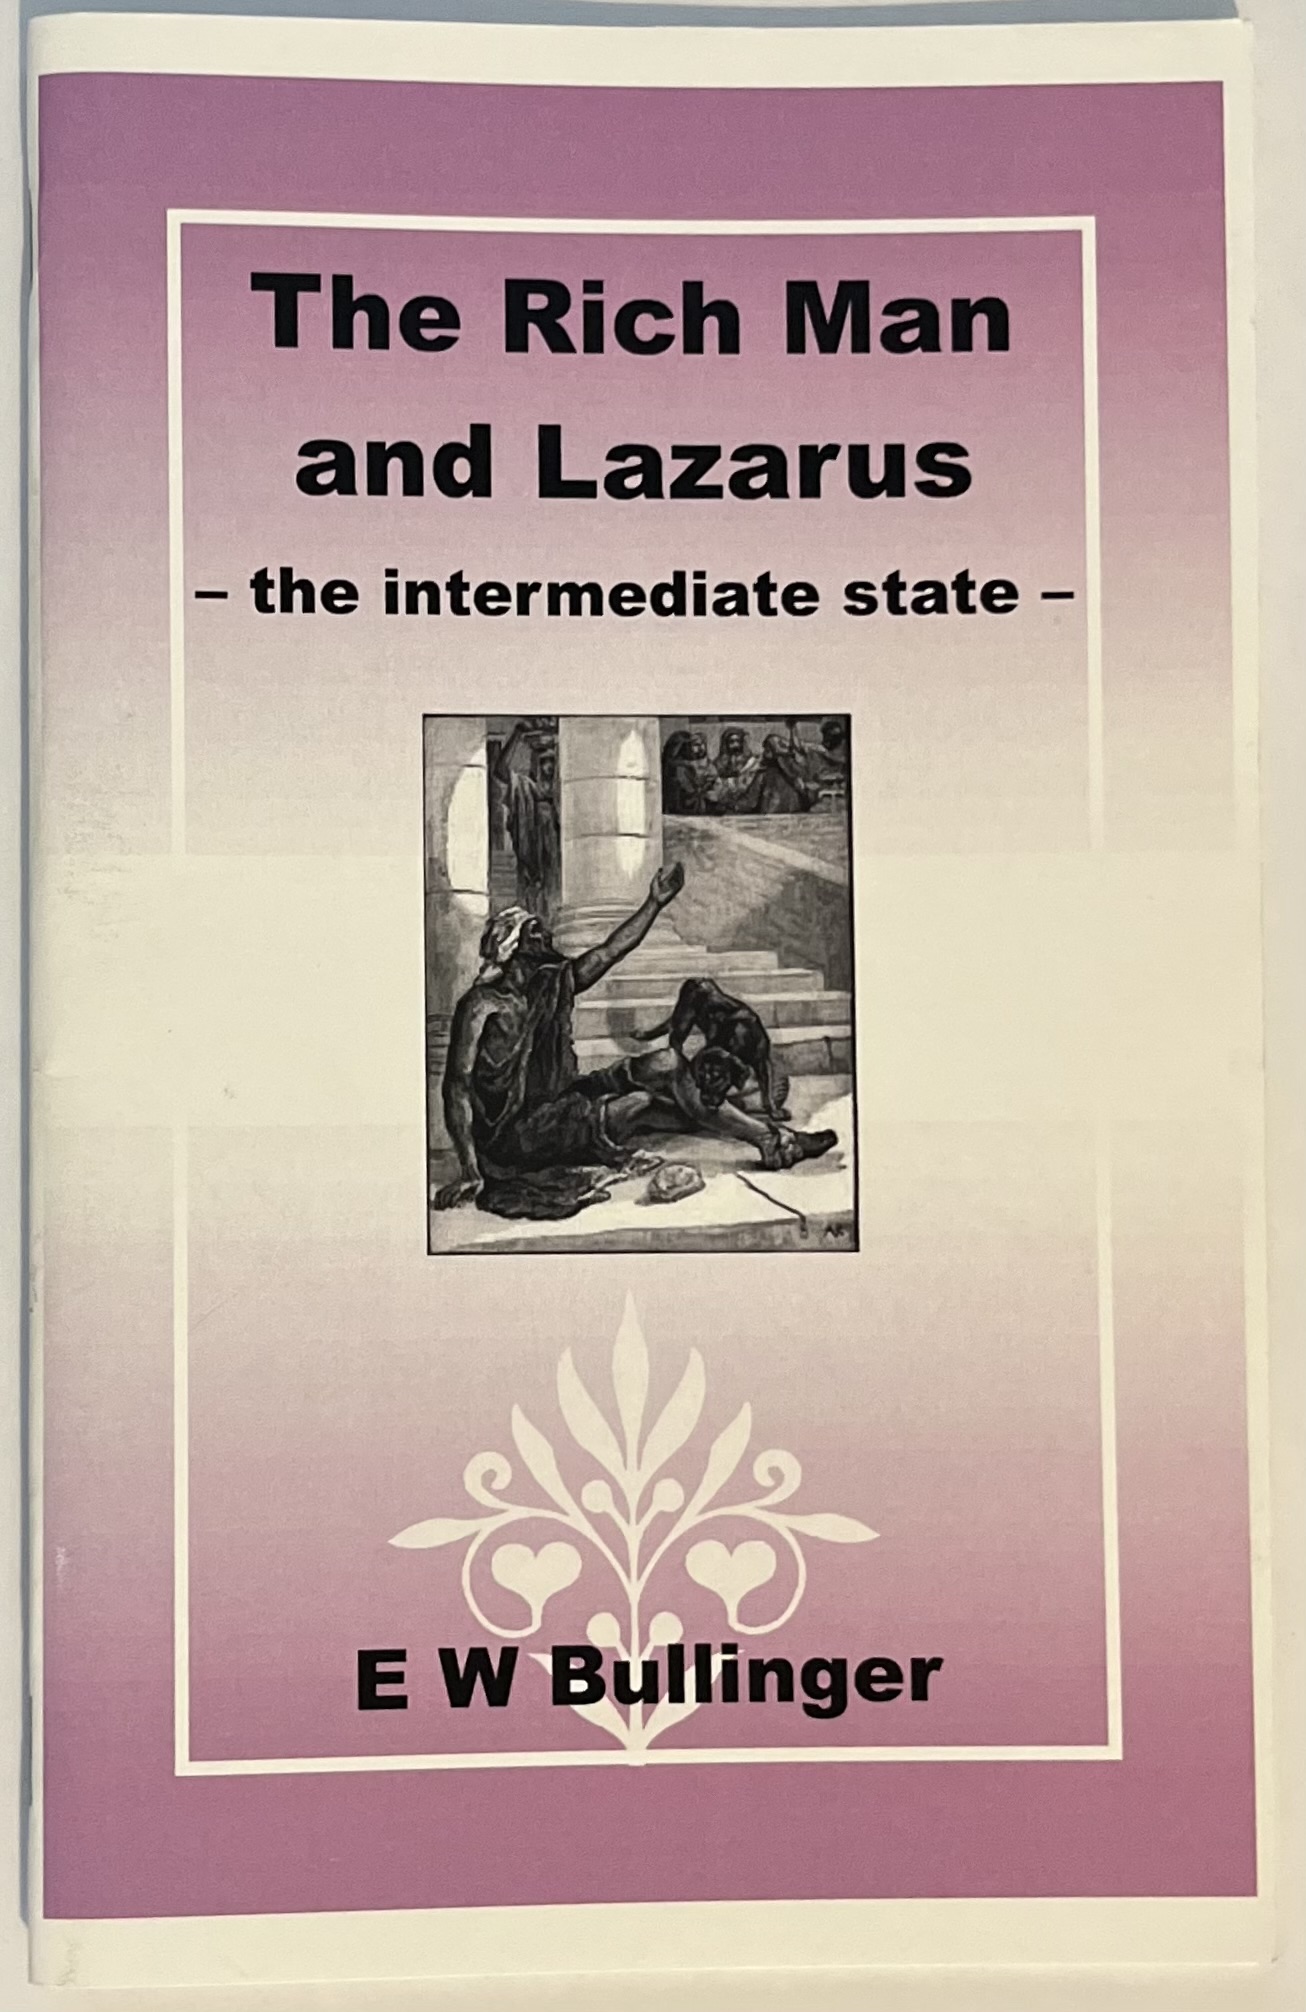 The Rich Man and Lazarus: the Intermediate State